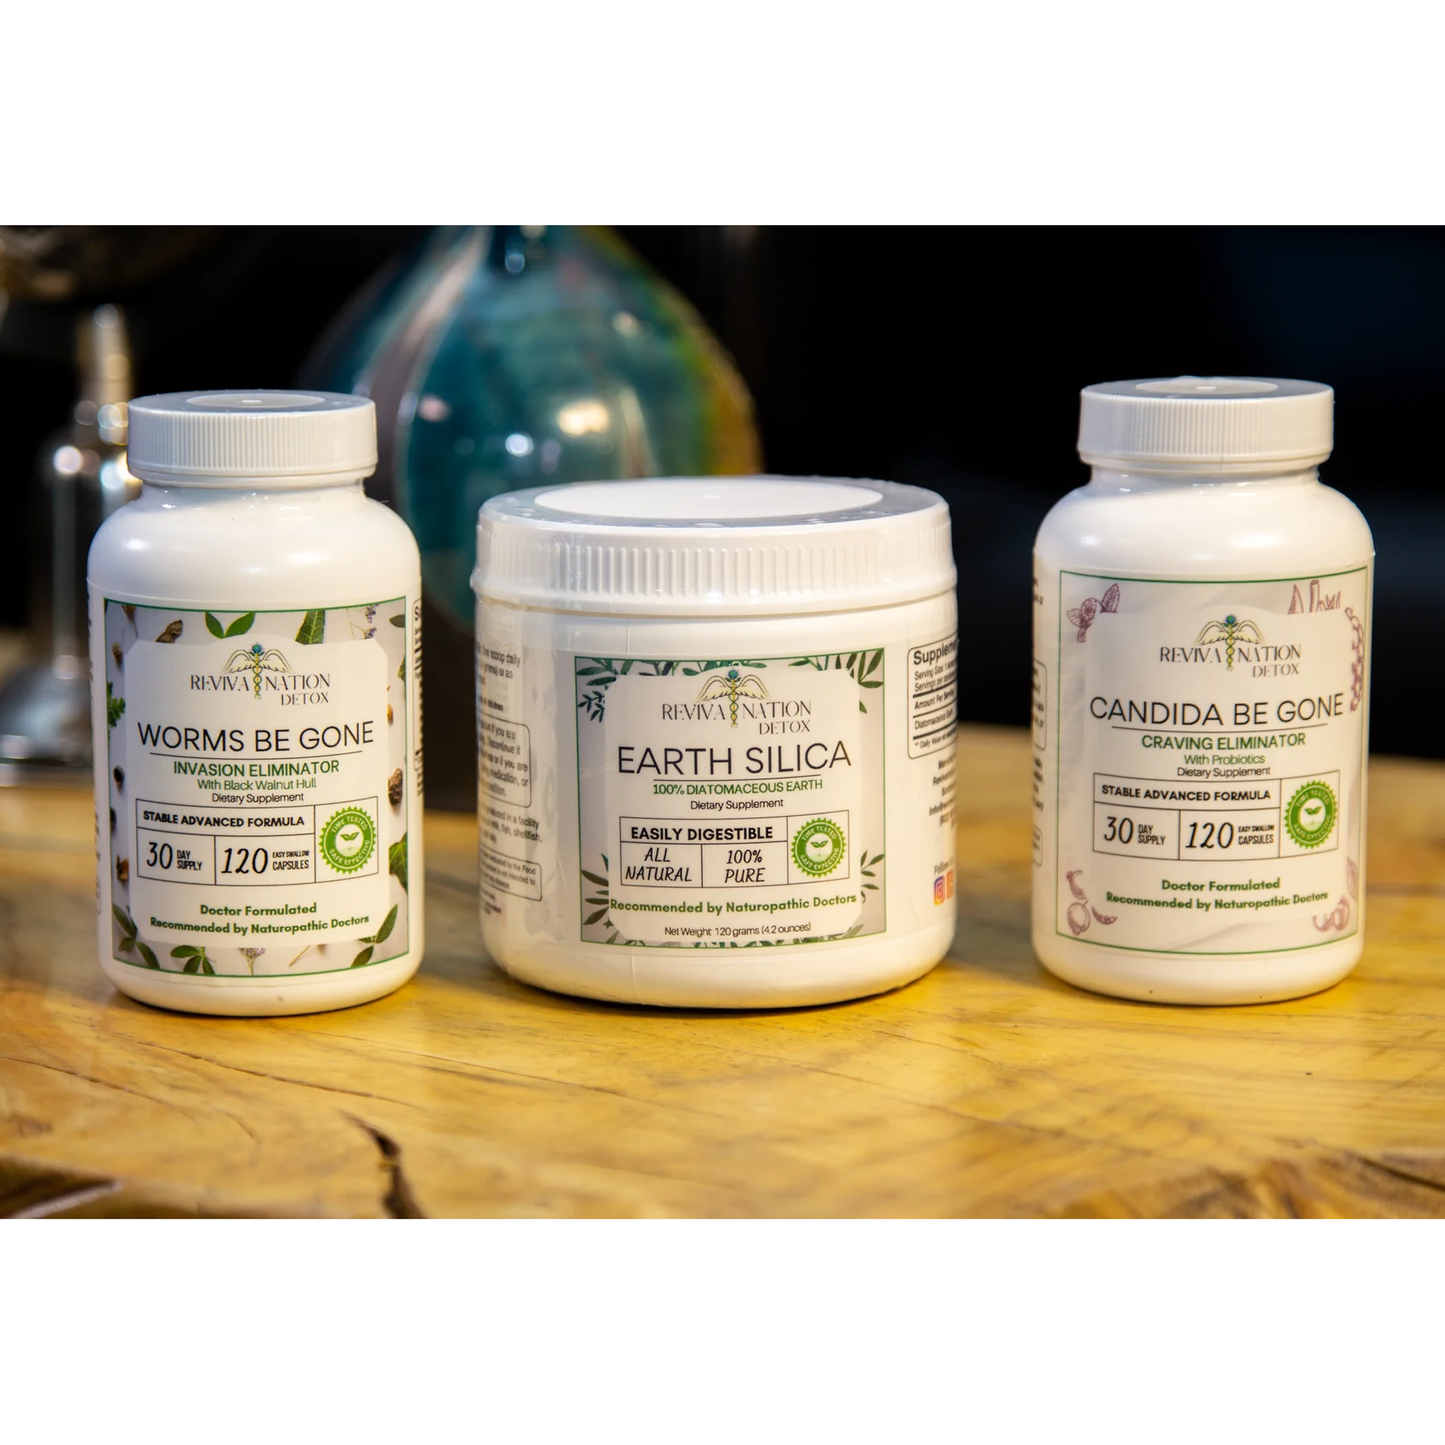 Worms Be Gone + Candida Be Gone w/ Diatomaceous Earth • 30-Day Cleanse - Love My Colon